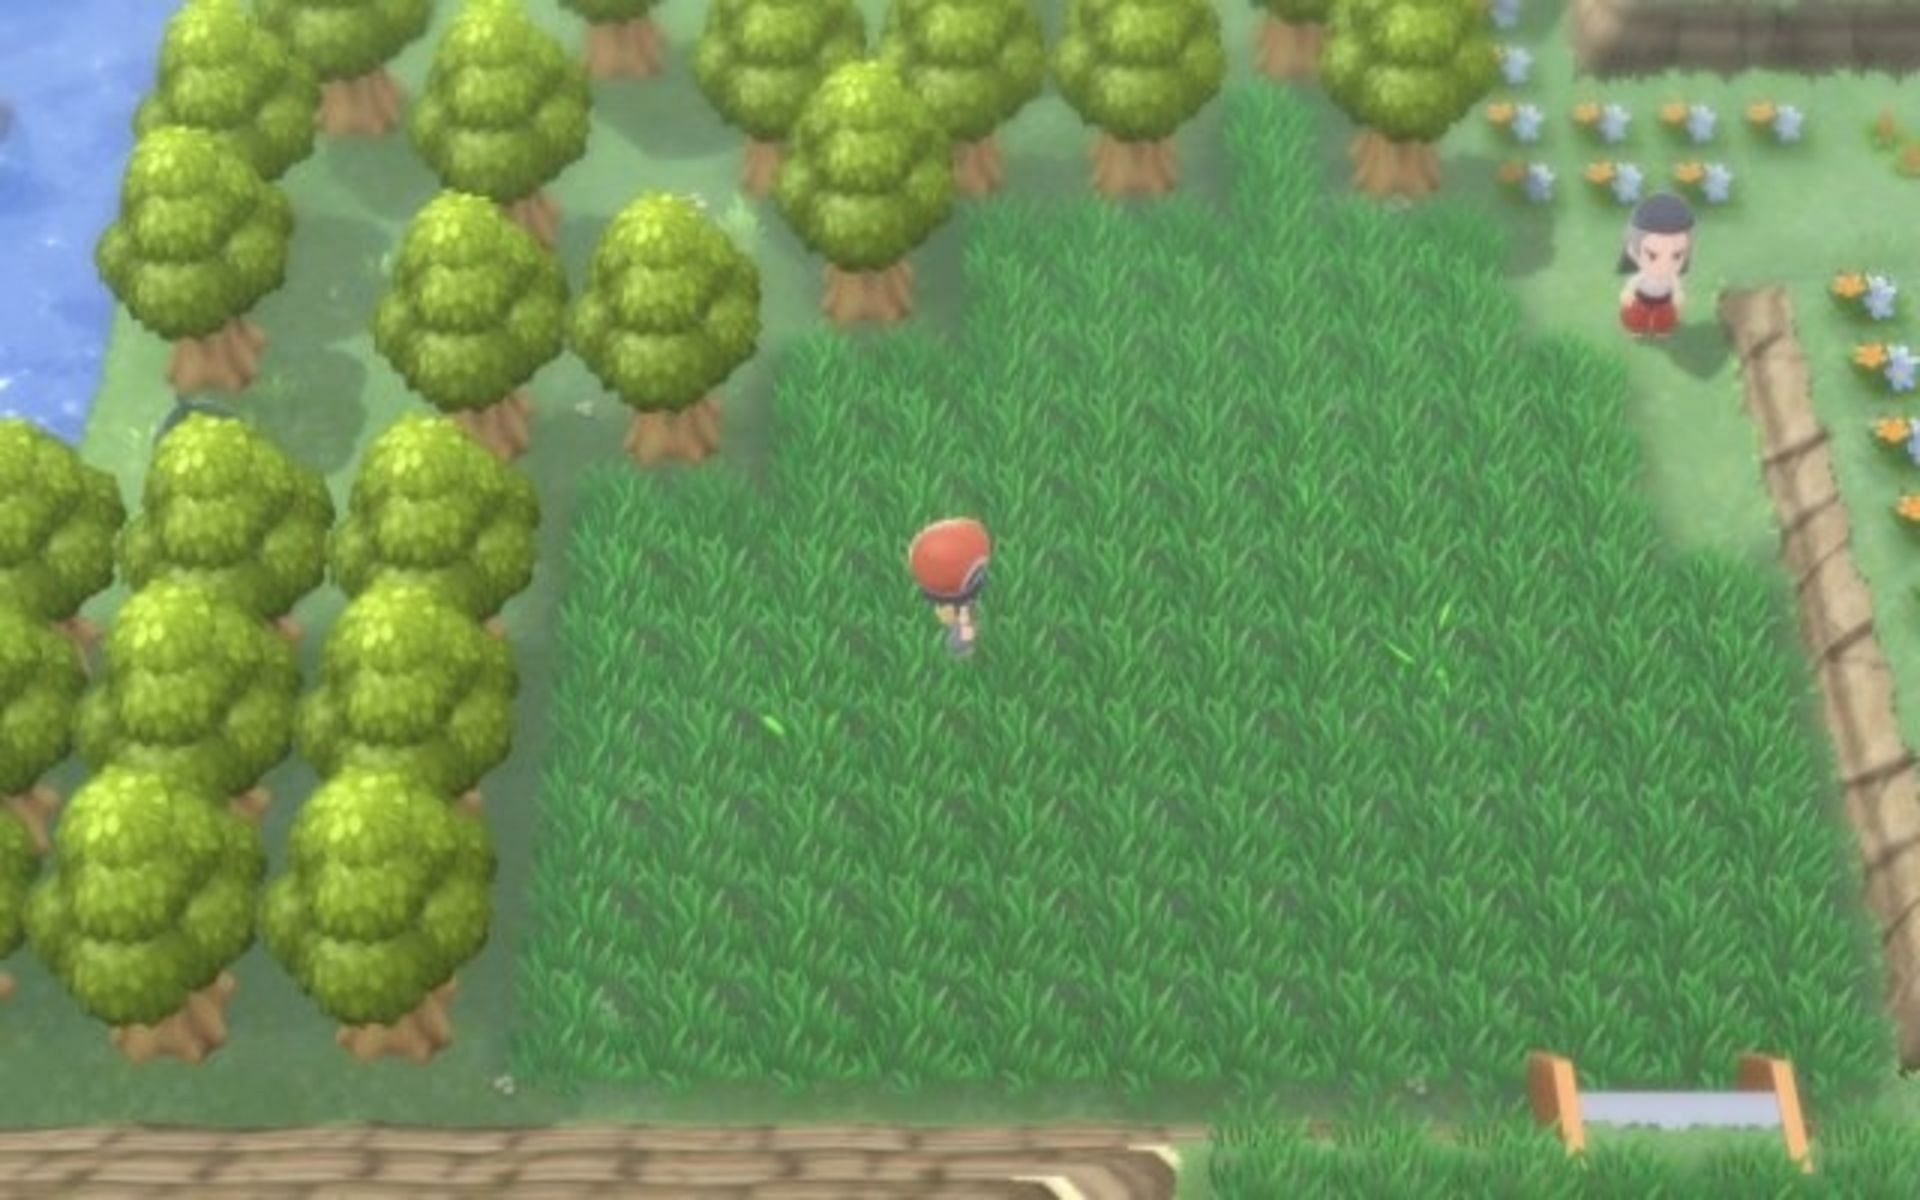 Trainers should stand in the middle of grassy areas to shiny hunt (Image via The Pokemon Company)